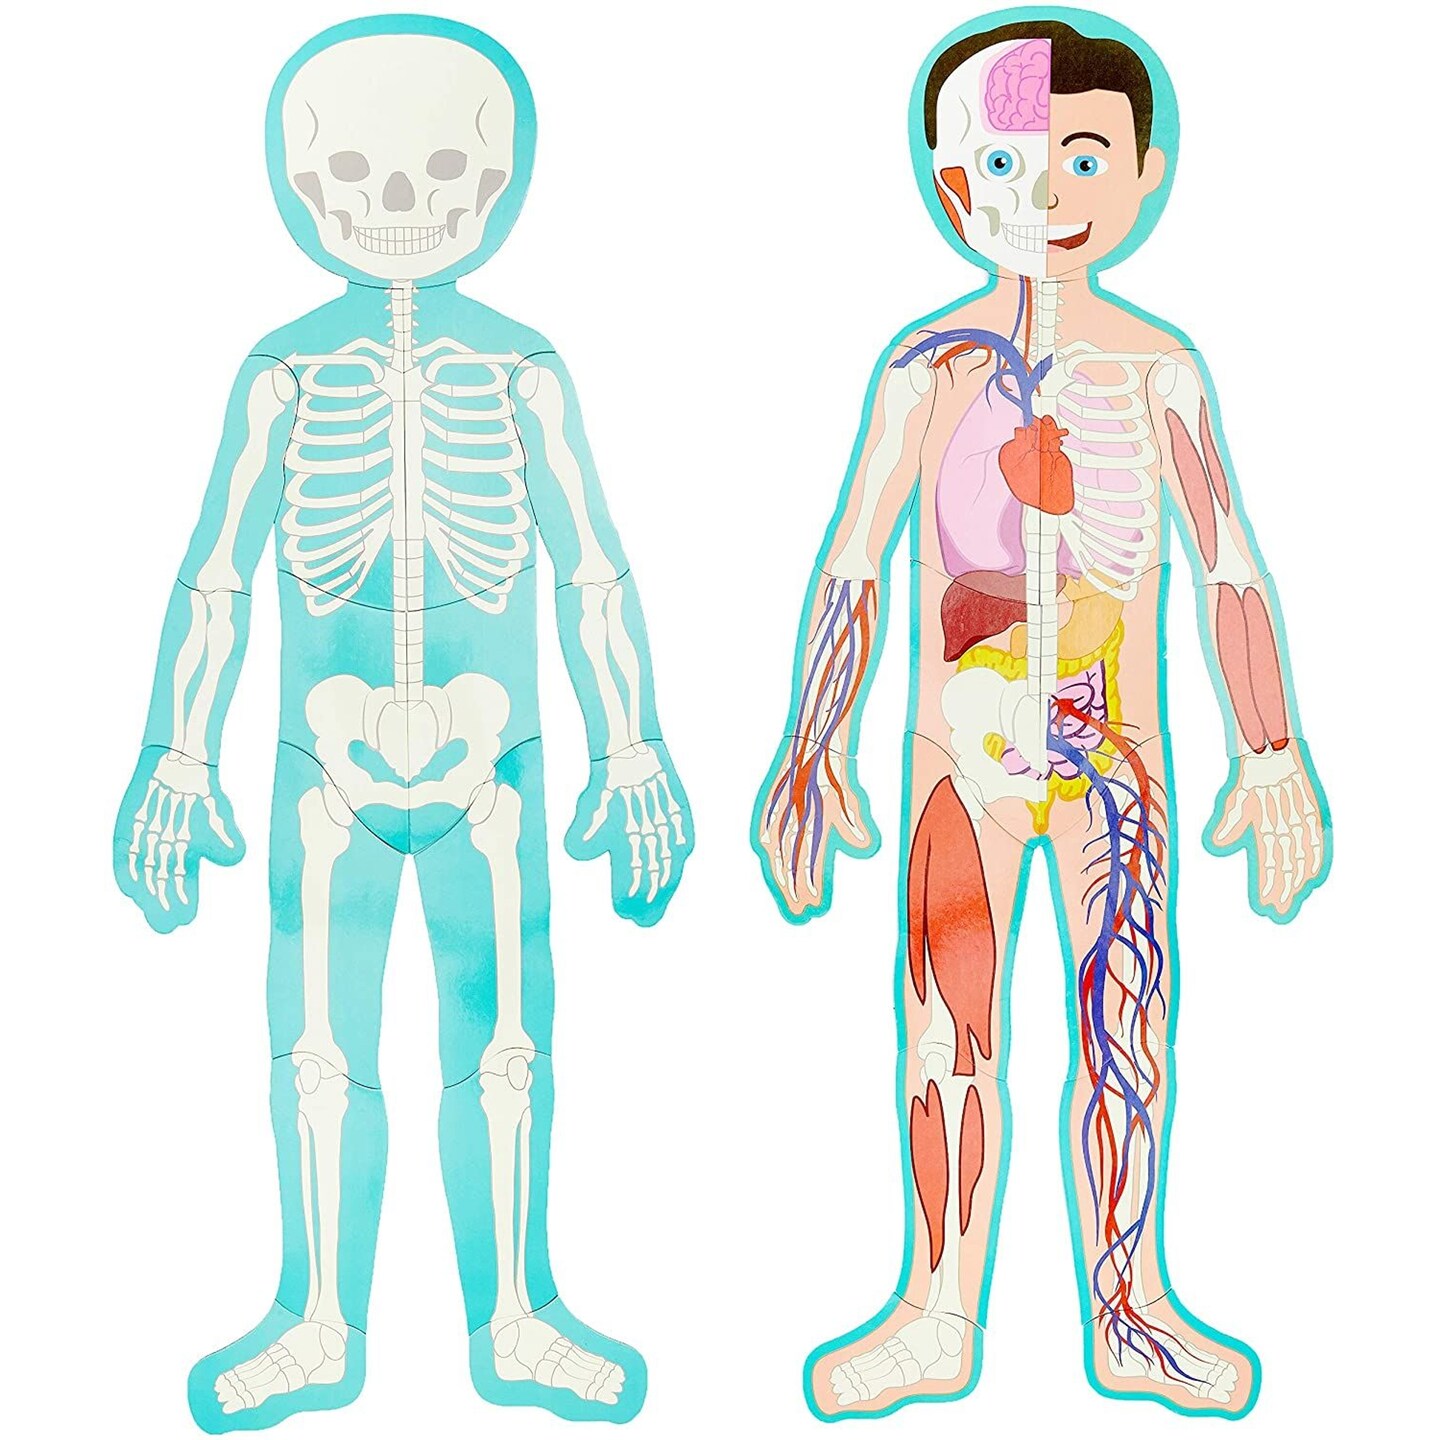 3 ft Large Magnetic Human Body Puzzle for Kids - Double-Sided Skeleton Floor Puzzles for Learning Anatomy, Body Parts Organs Model